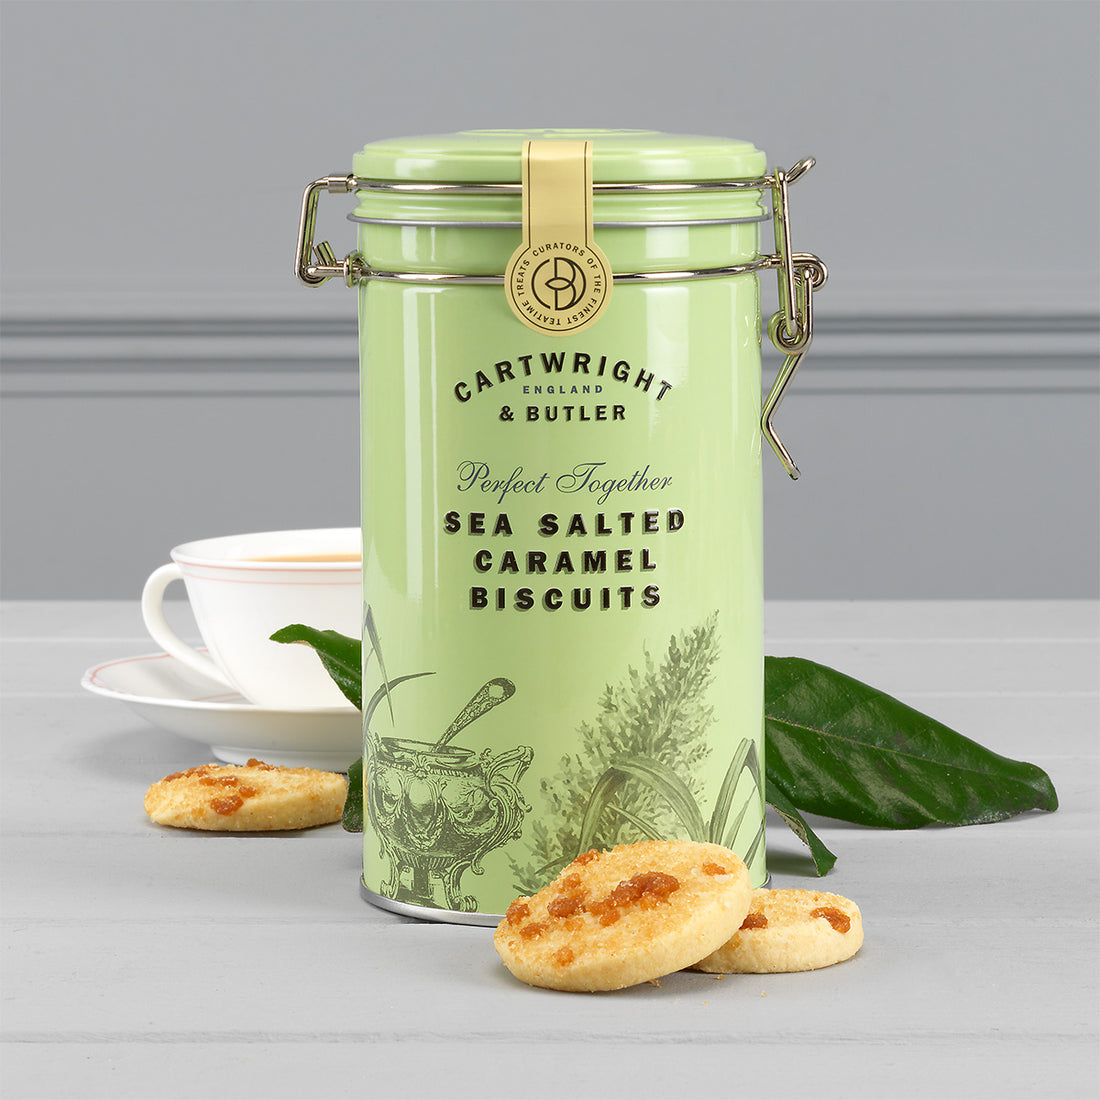 Cartwright & Butler, Cartwright & Butler Salted Caramel Biscuits in Tin, Redber Coffee